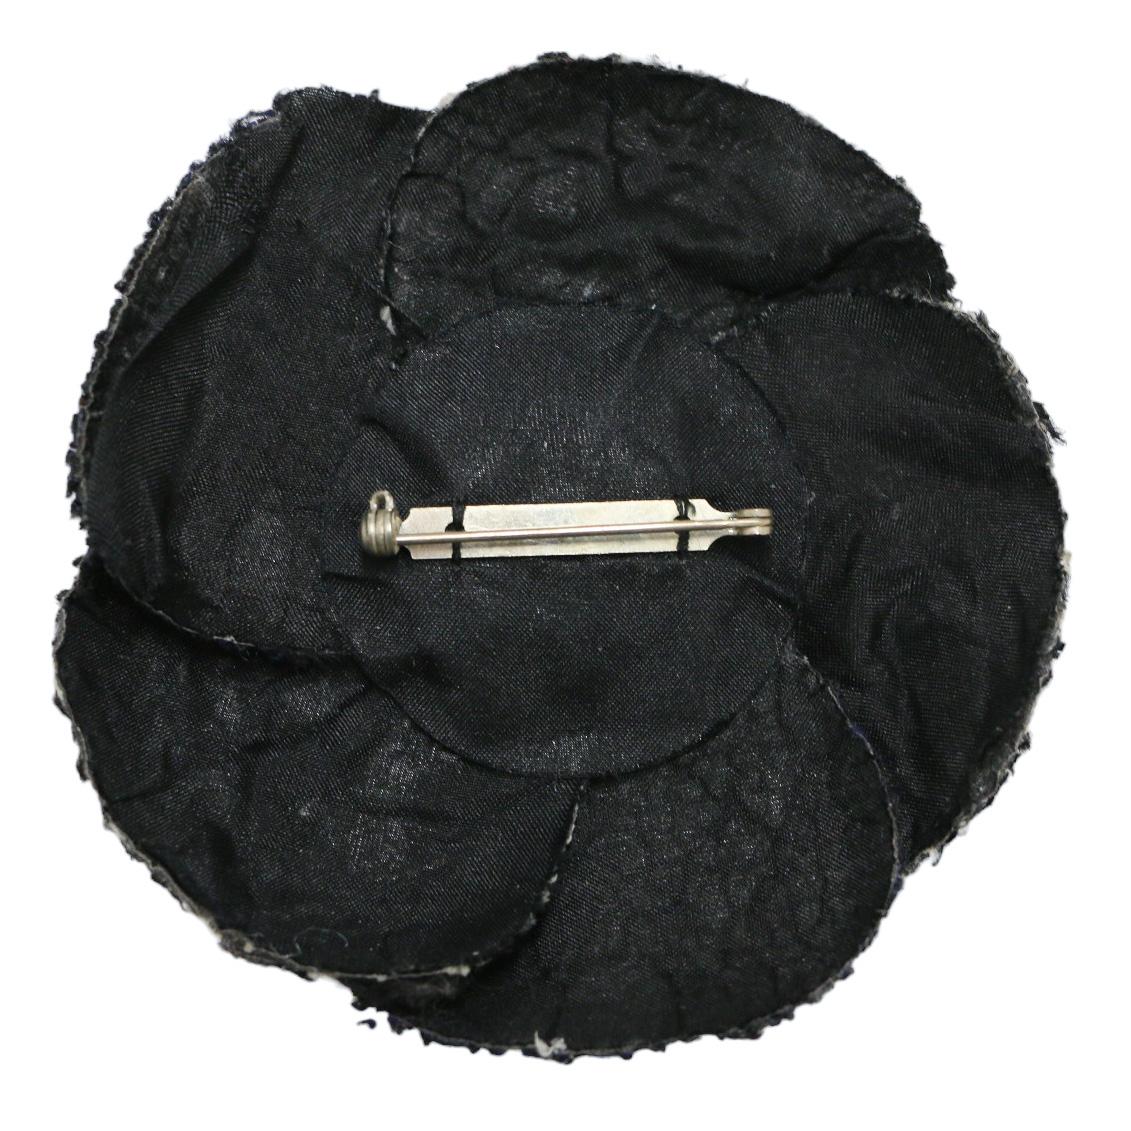 Stunning brooch by Chanel, a Camelia, Coco Chanel's favorite flower !
Condition: excellent
Material: tweed
Color: black, white, navy blue
Dimensions: 8 x 8 cm
Jewelry: silver-plated metal
Stamp: no
Details: emblematic Chanel camellia with two